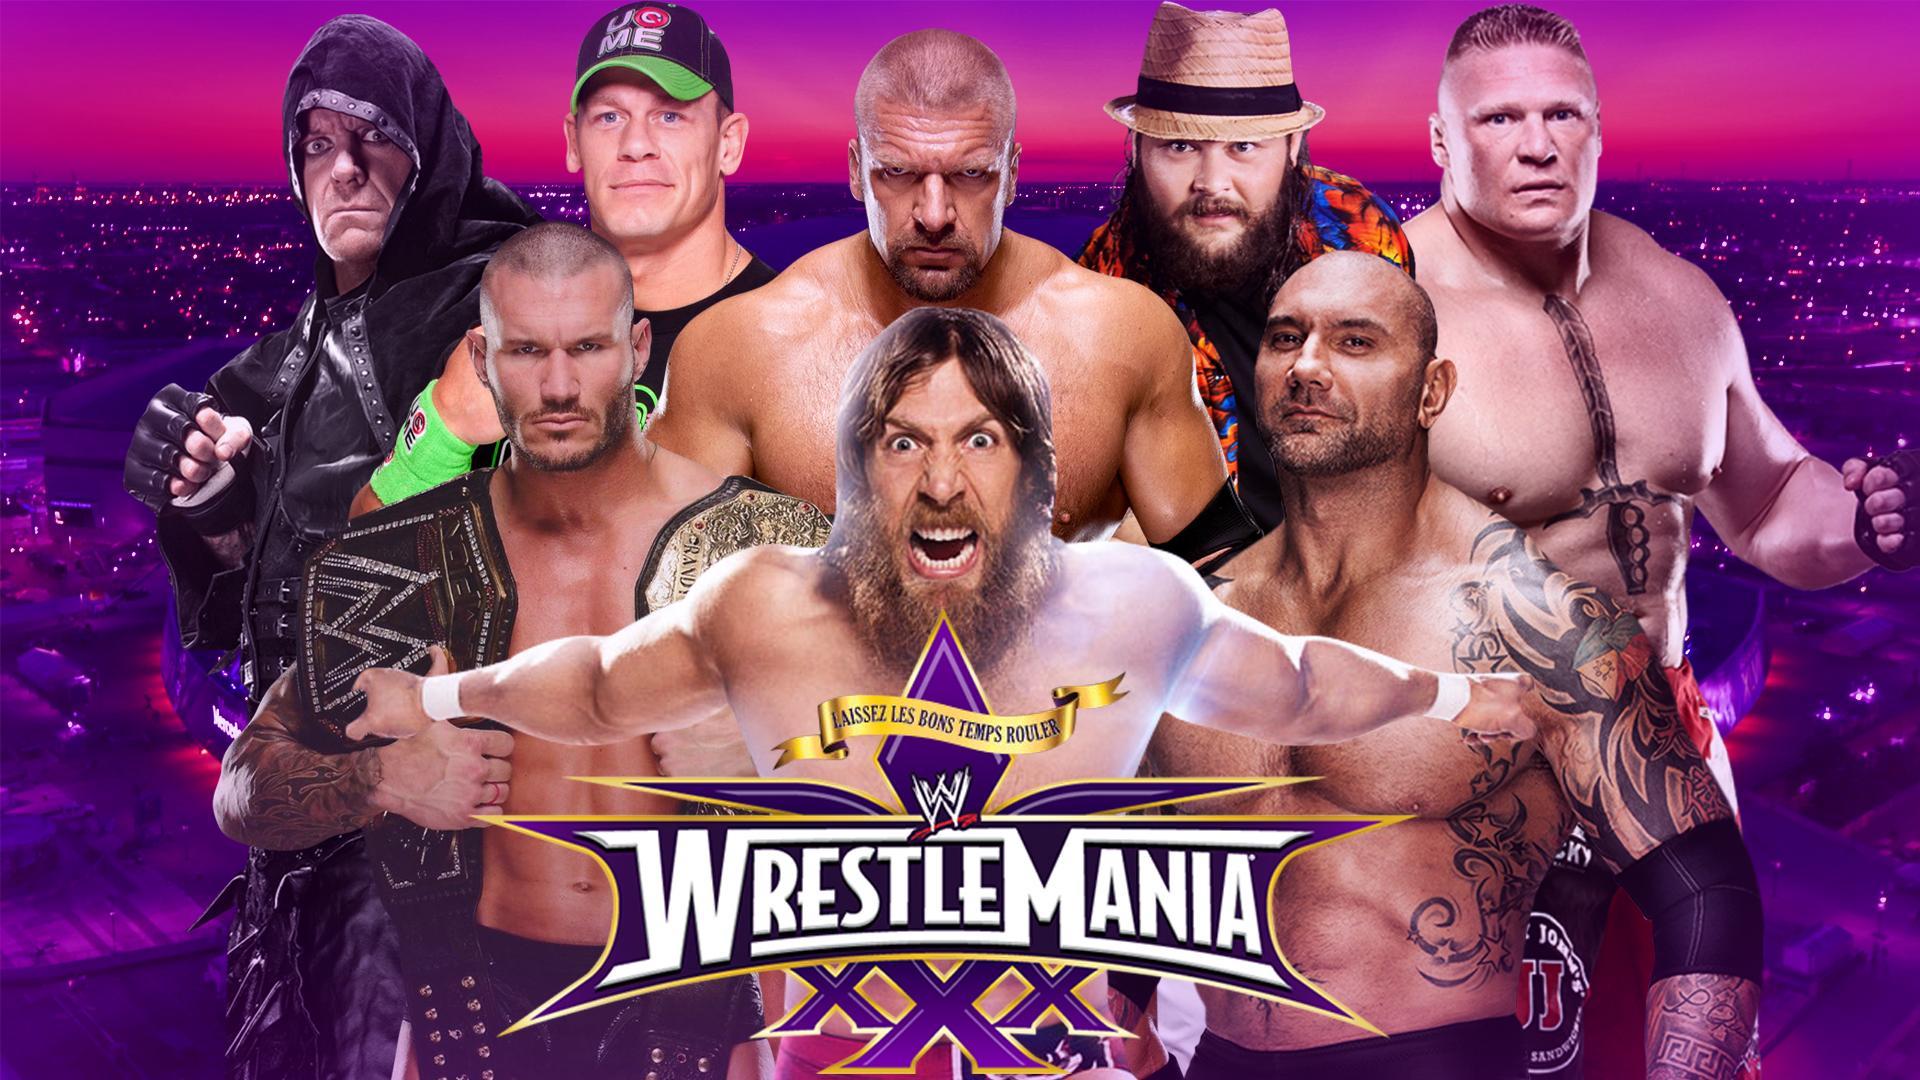 Since WWE doesn't have an official Wrestlemania 30 Wallpaper, I